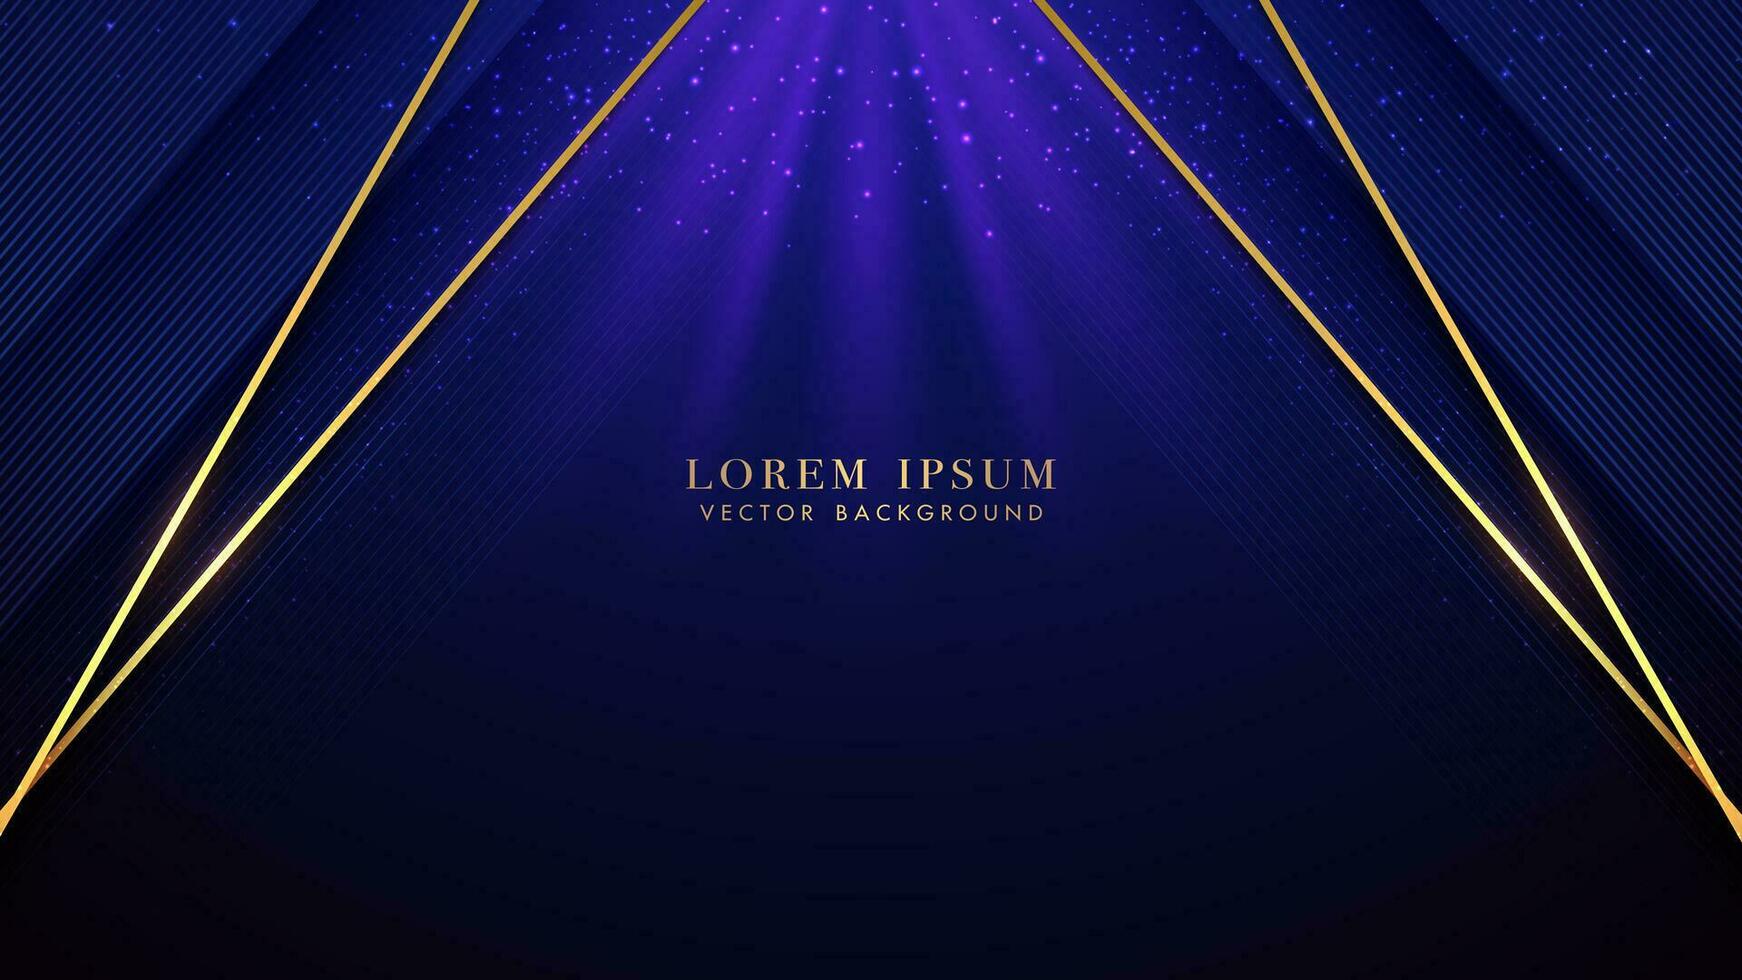 Diagonal gold line and blue line stripe with sparkle glowing effect decoration on blue background. Luxury style design concept vector